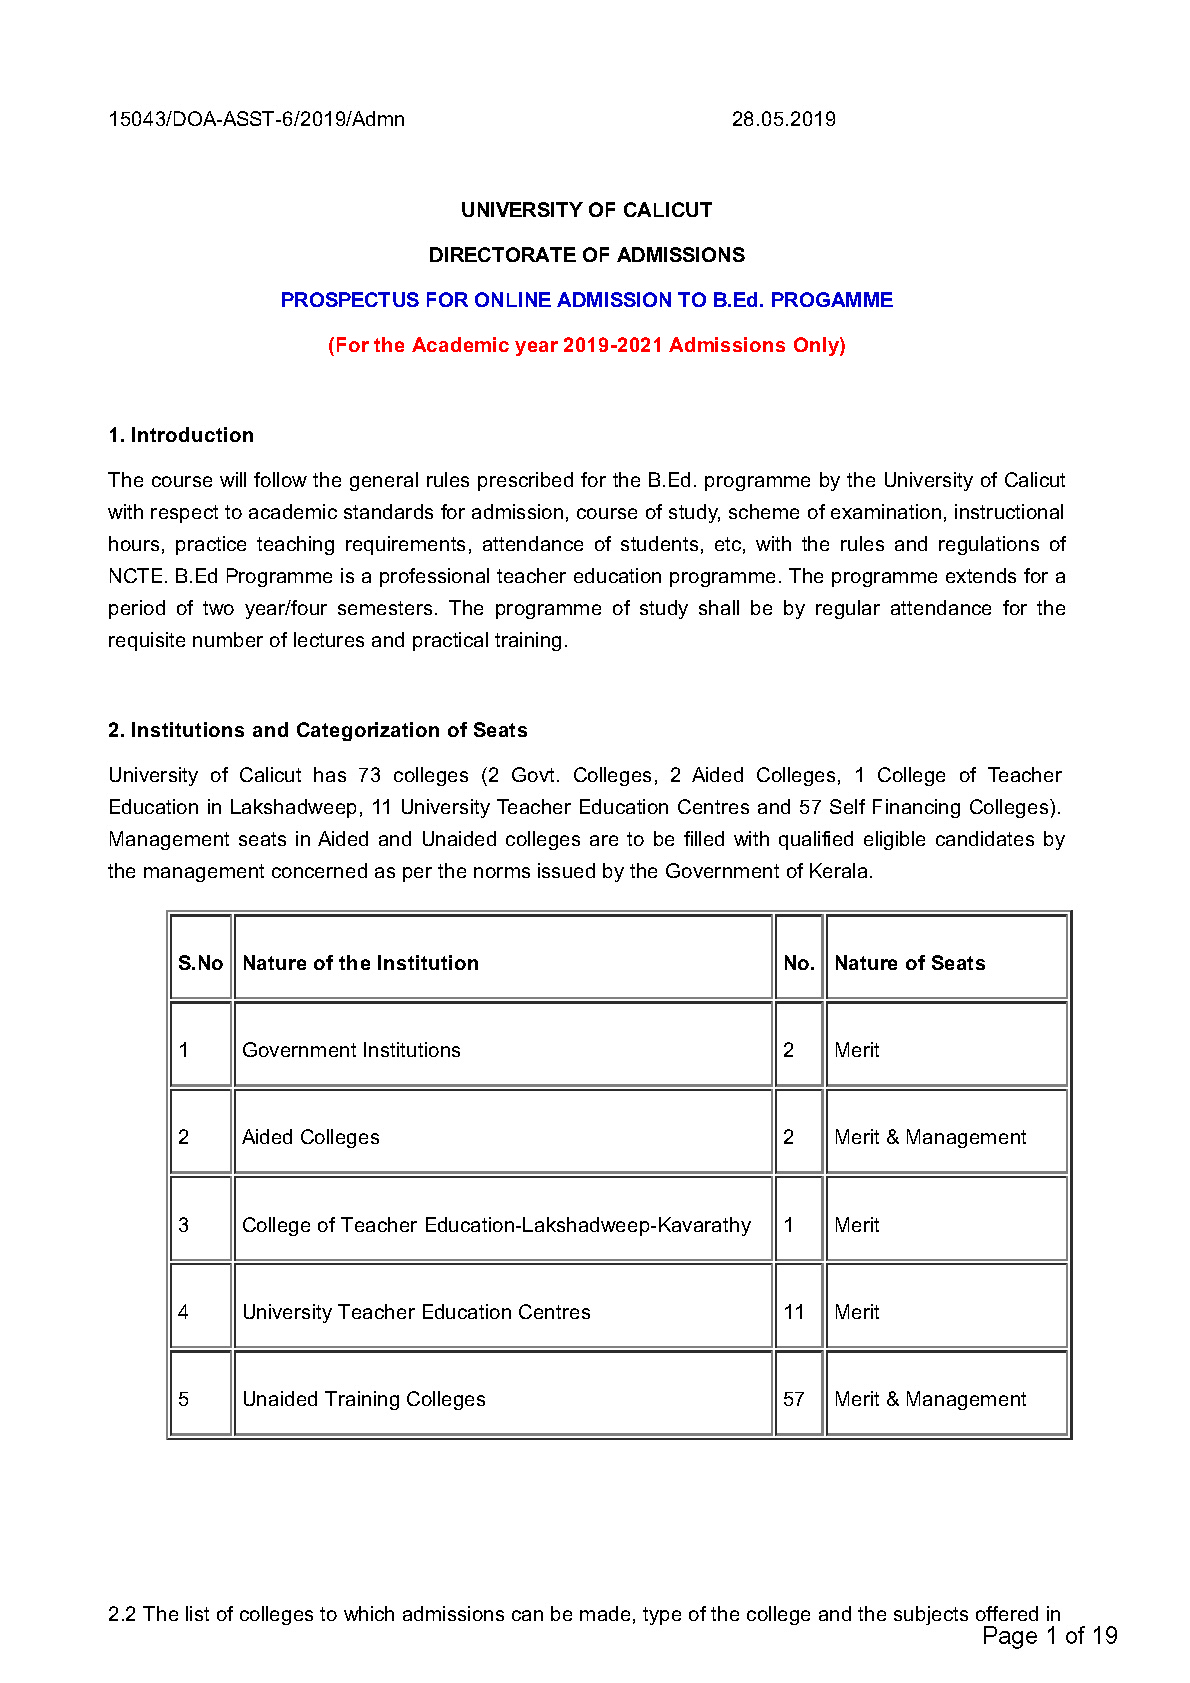 Prospectus For Online Admission To B Ed Progamme 2019 2021 - Notification Image 1